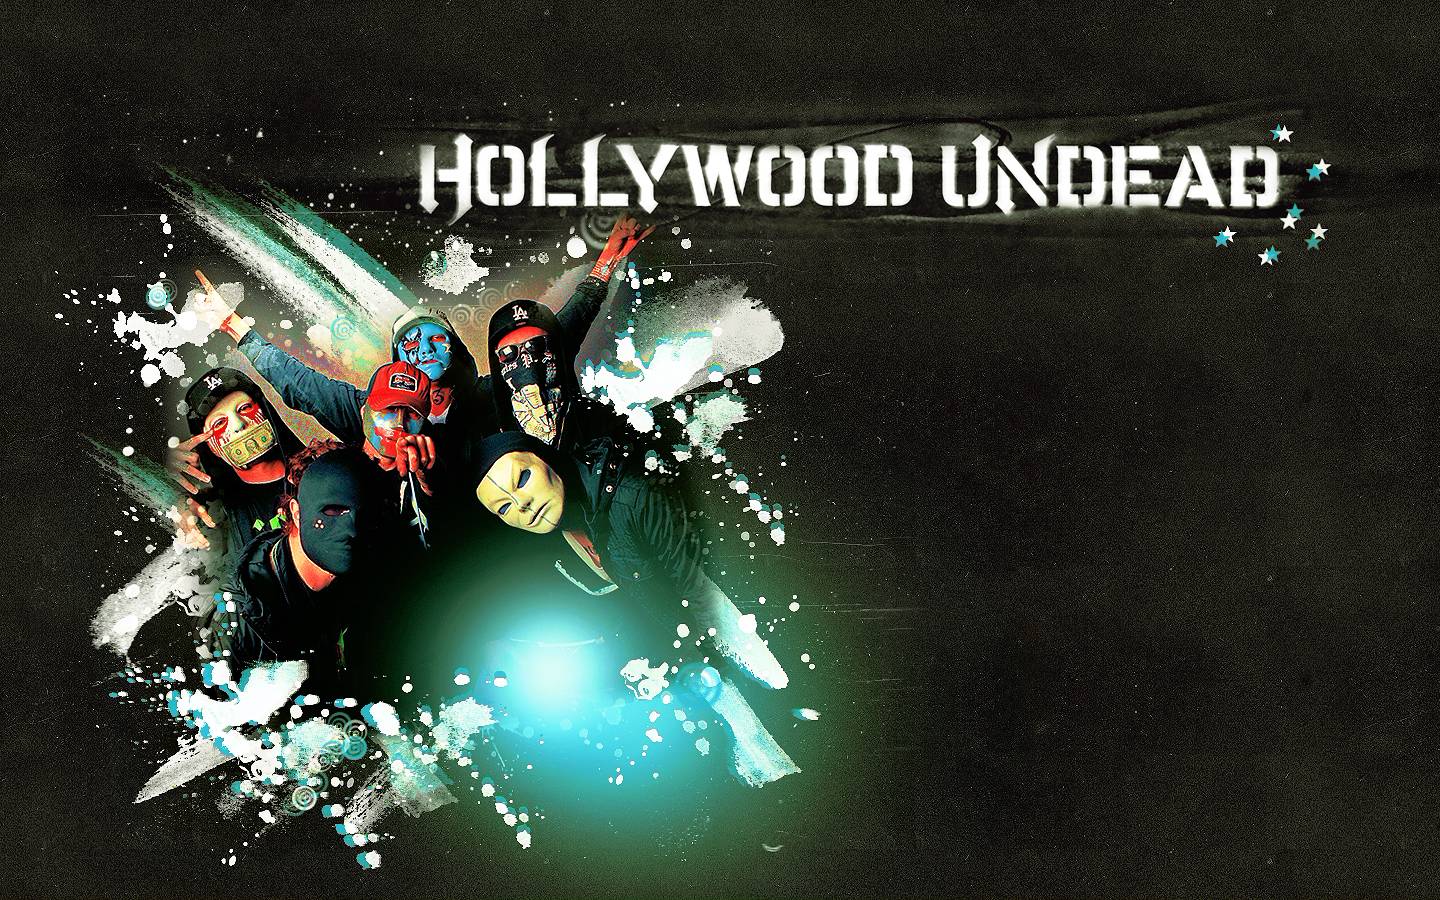 Hollywood Undead Wallpaper HD Early 1440x900PX Wallpaper